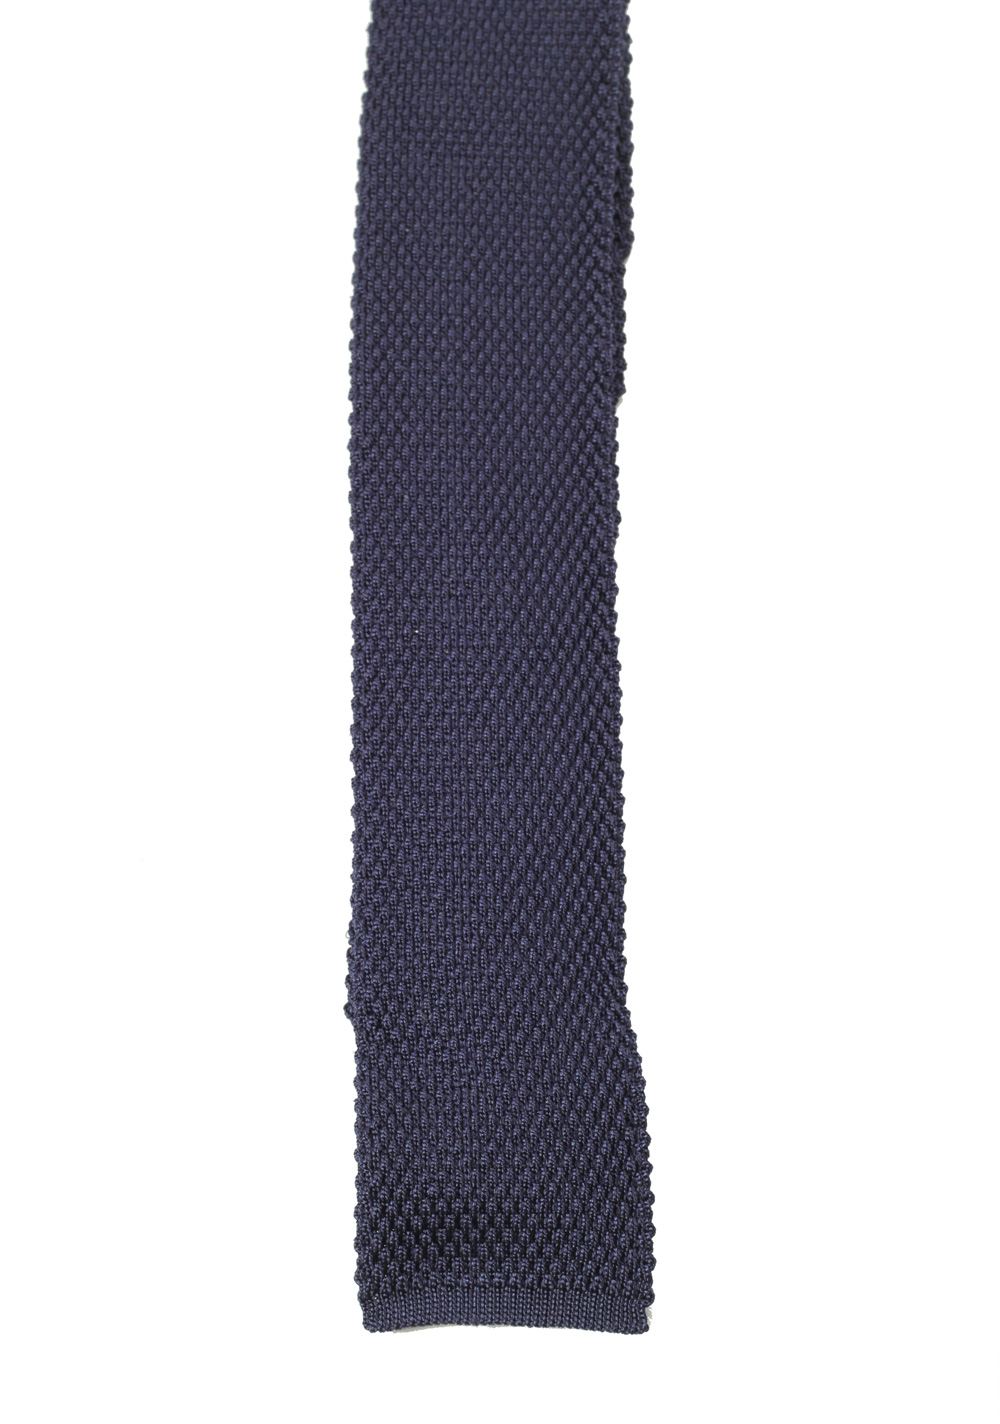 TOM FORD Knitted Tie | Costume Limité